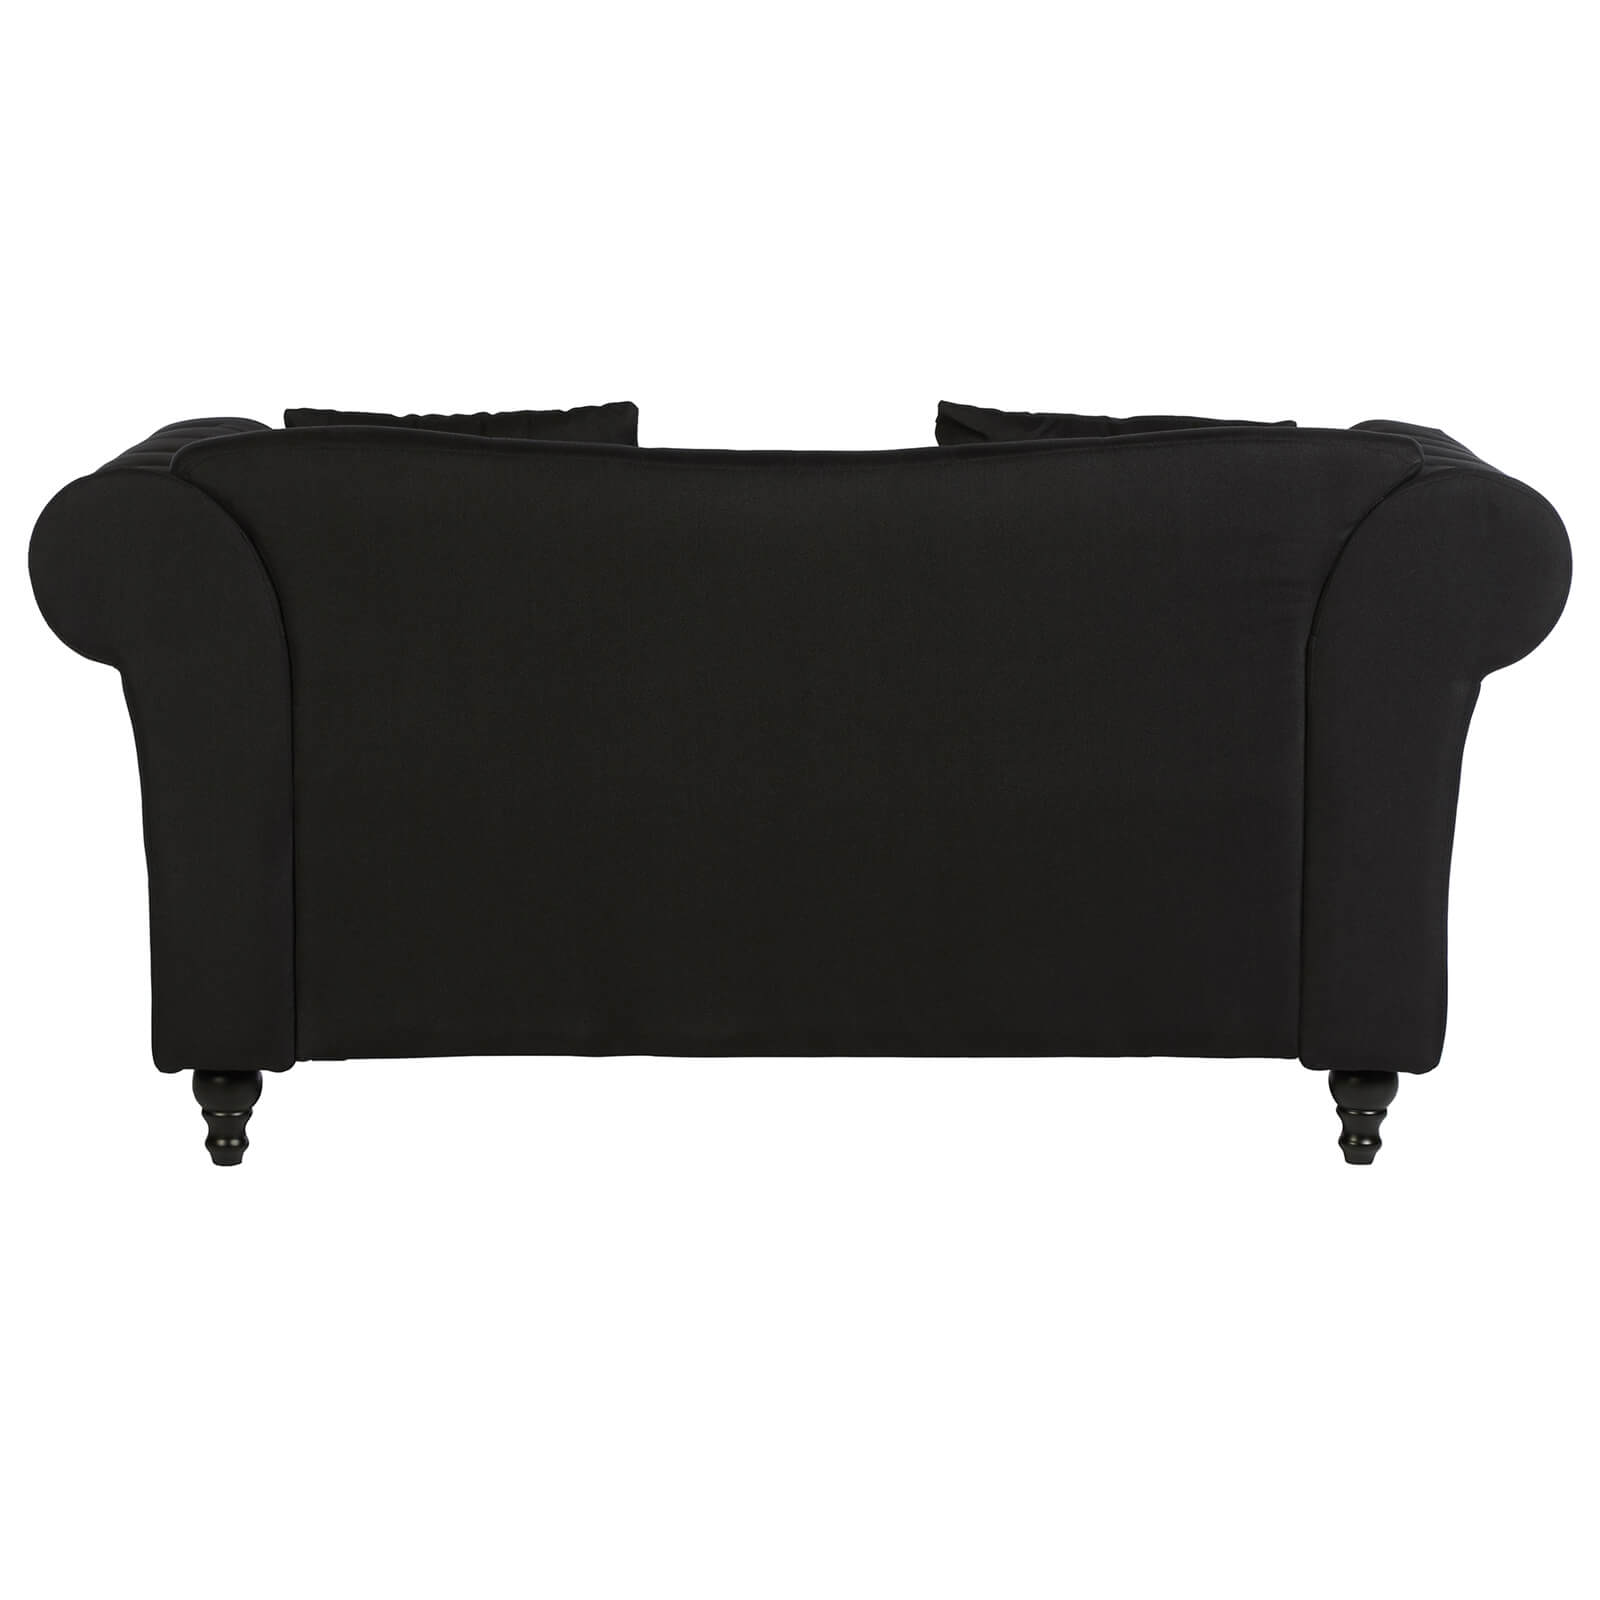 Fable 2 Seat Chesterfield Sofa - Black